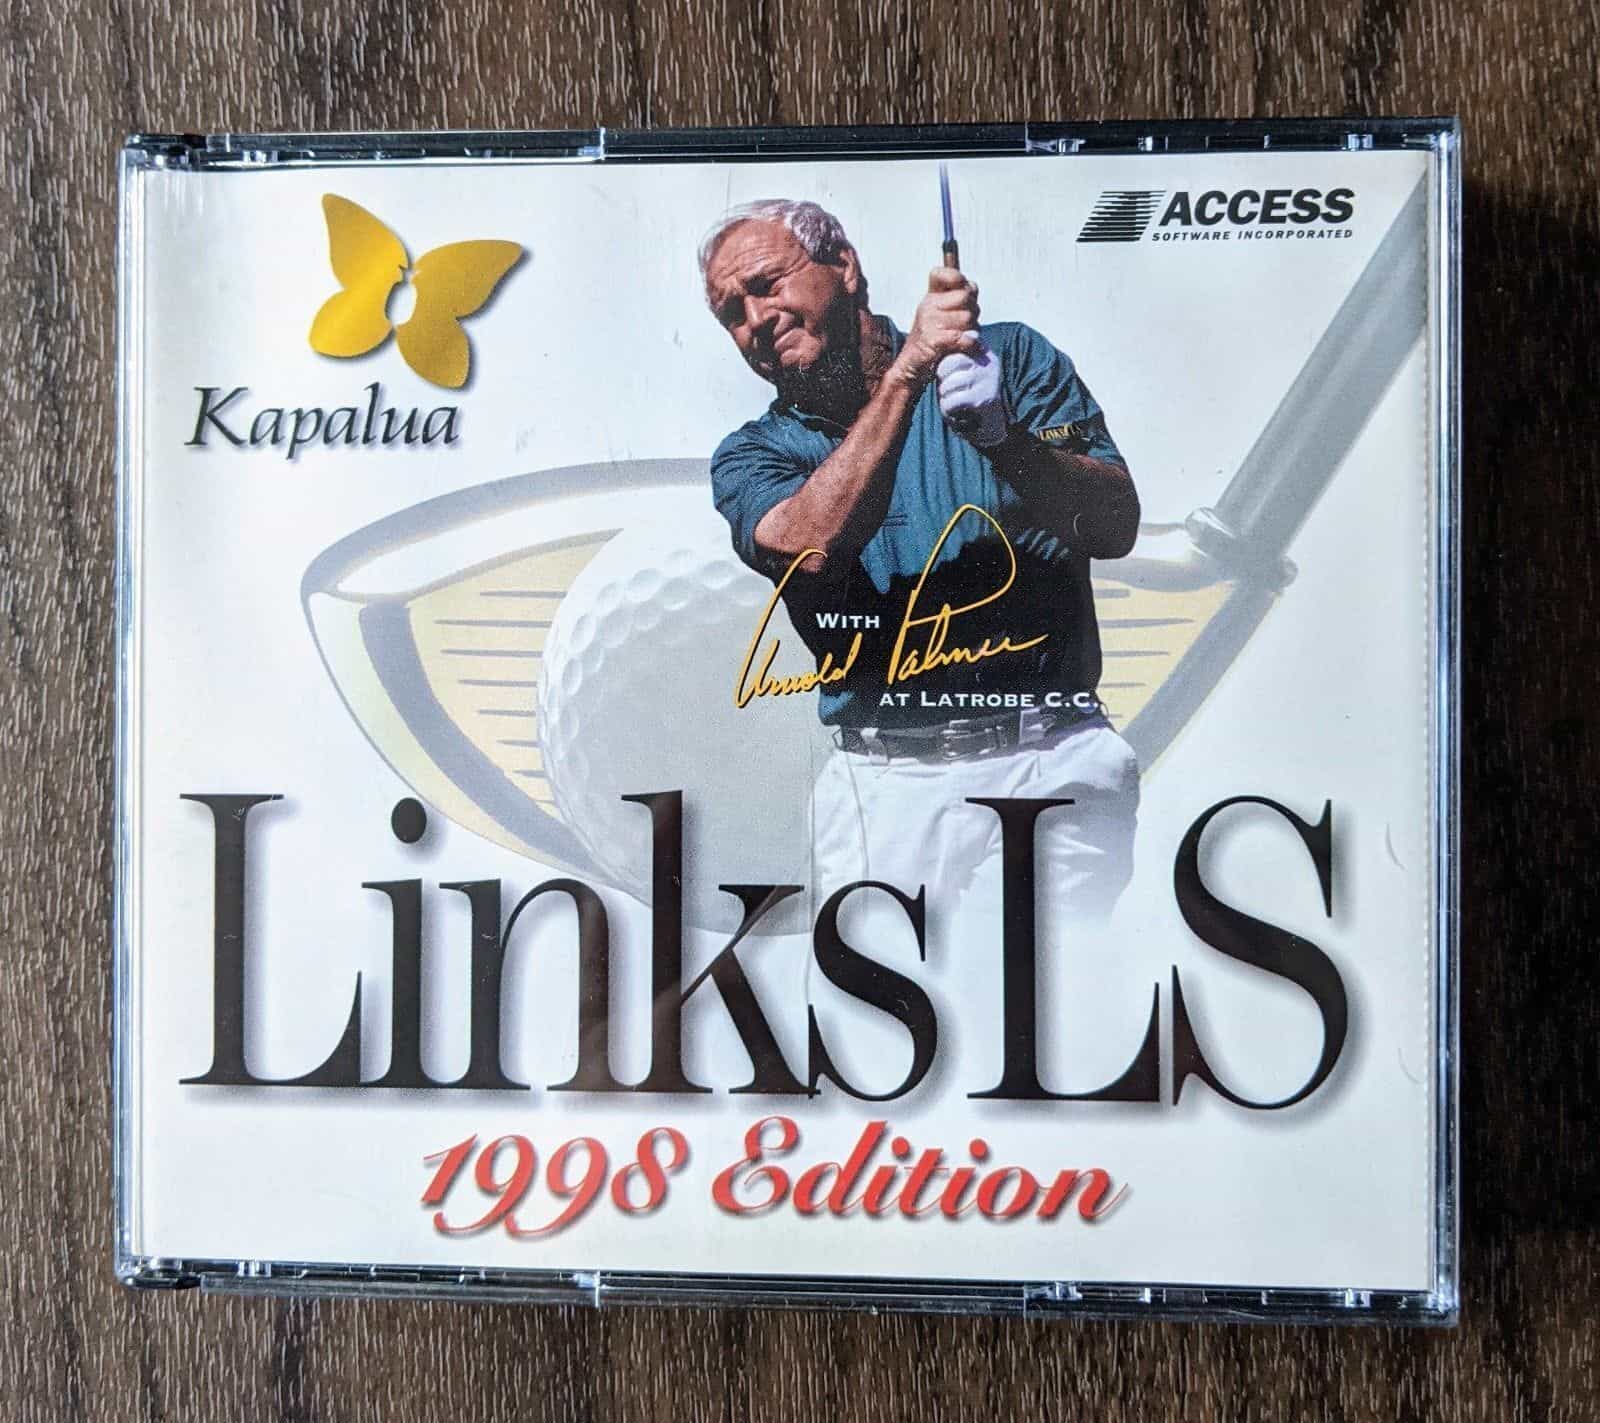 Links LS 1998 edition Discs 2-4 PC Game Disc Replacement